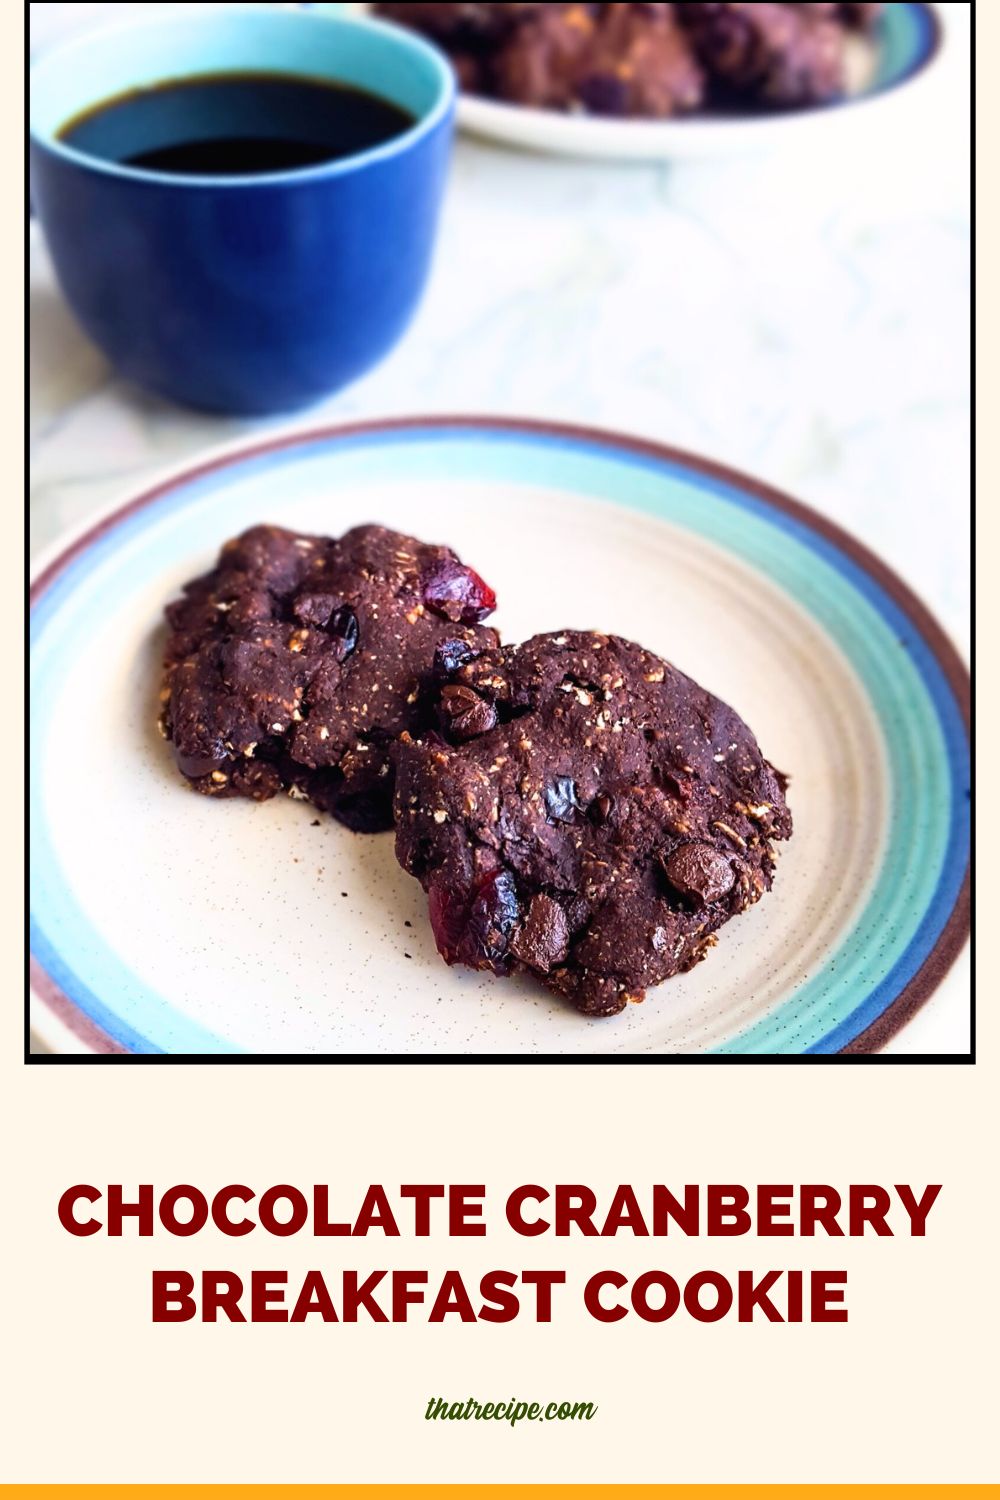 two chocolate cookies on a plate with a cup of coffee next to it and text overlay "Chocolate cranberry breakfast cookies"